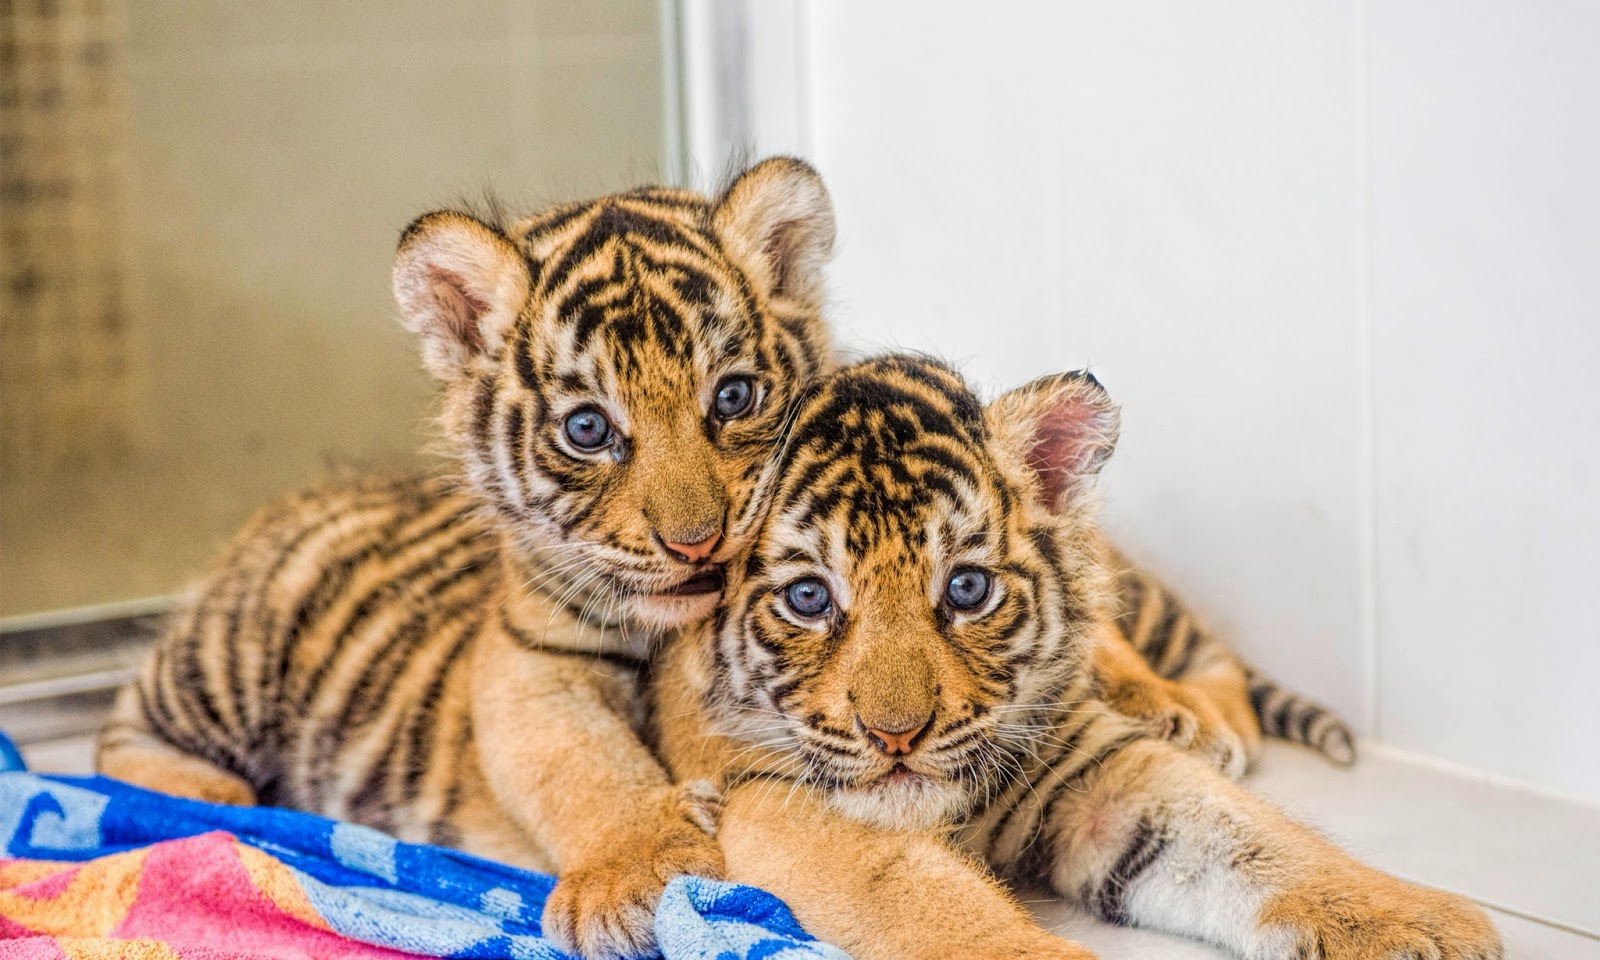 Tiger Cubs Wallpapers, Animal Hd Wallpapers Free Download - Tiger Cub Images Hd , HD Wallpaper & Backgrounds